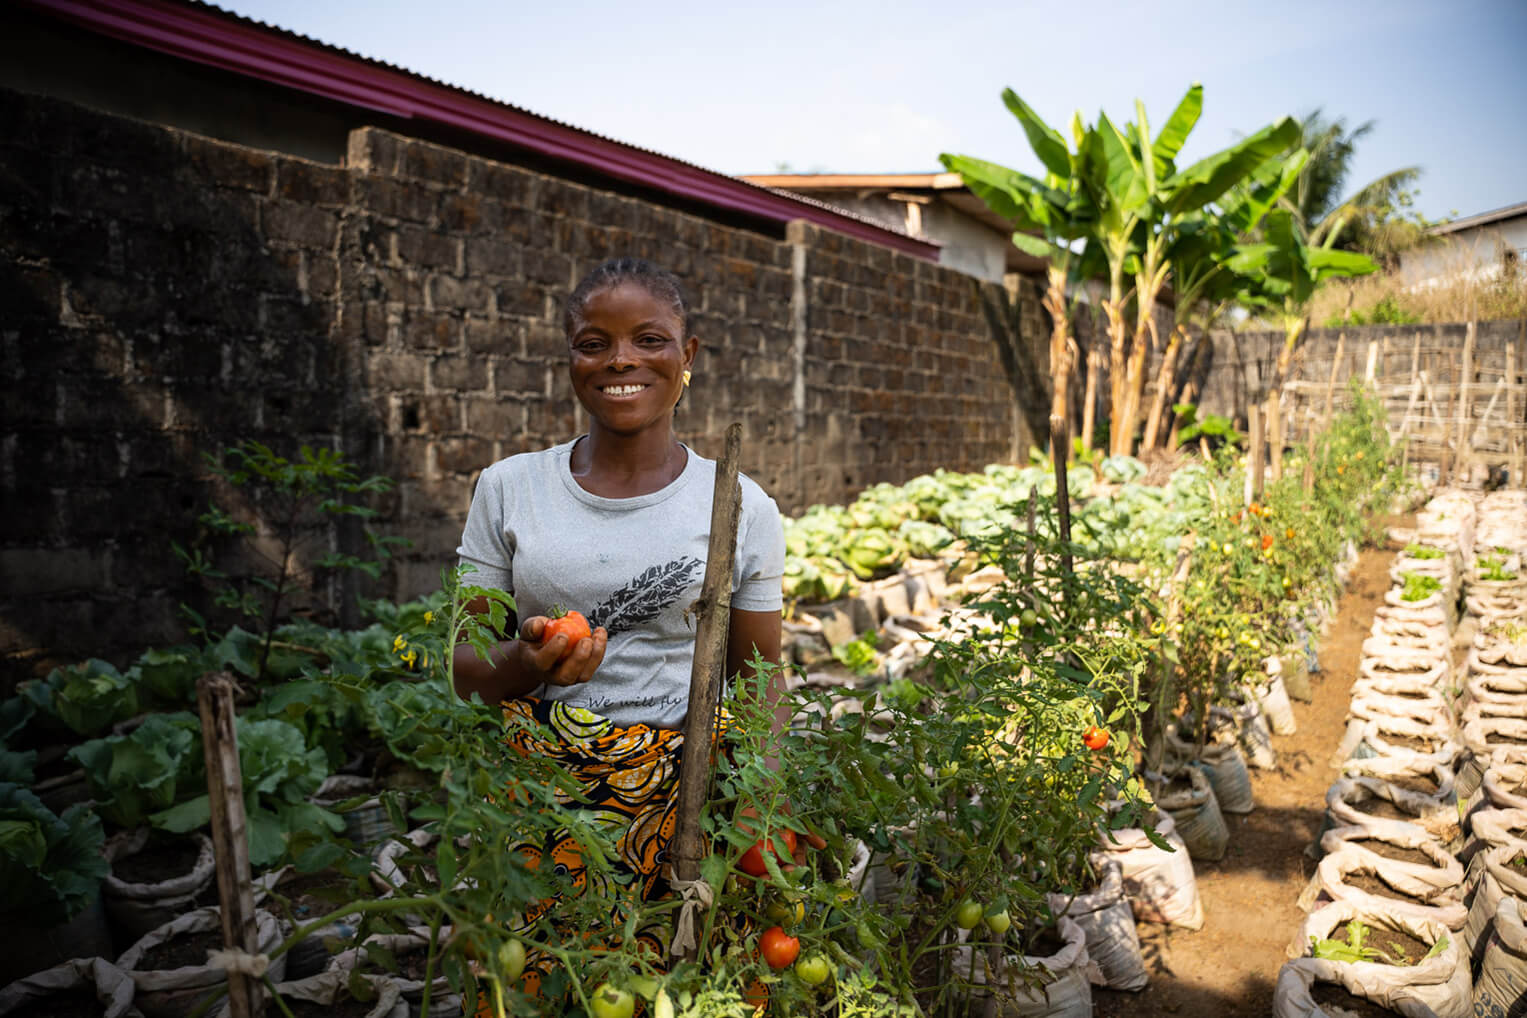 Marthaline, another Eden Project participant, has been excited to learn better growing practices. Here she's celebrating harvests of tomatoes and bitterball.